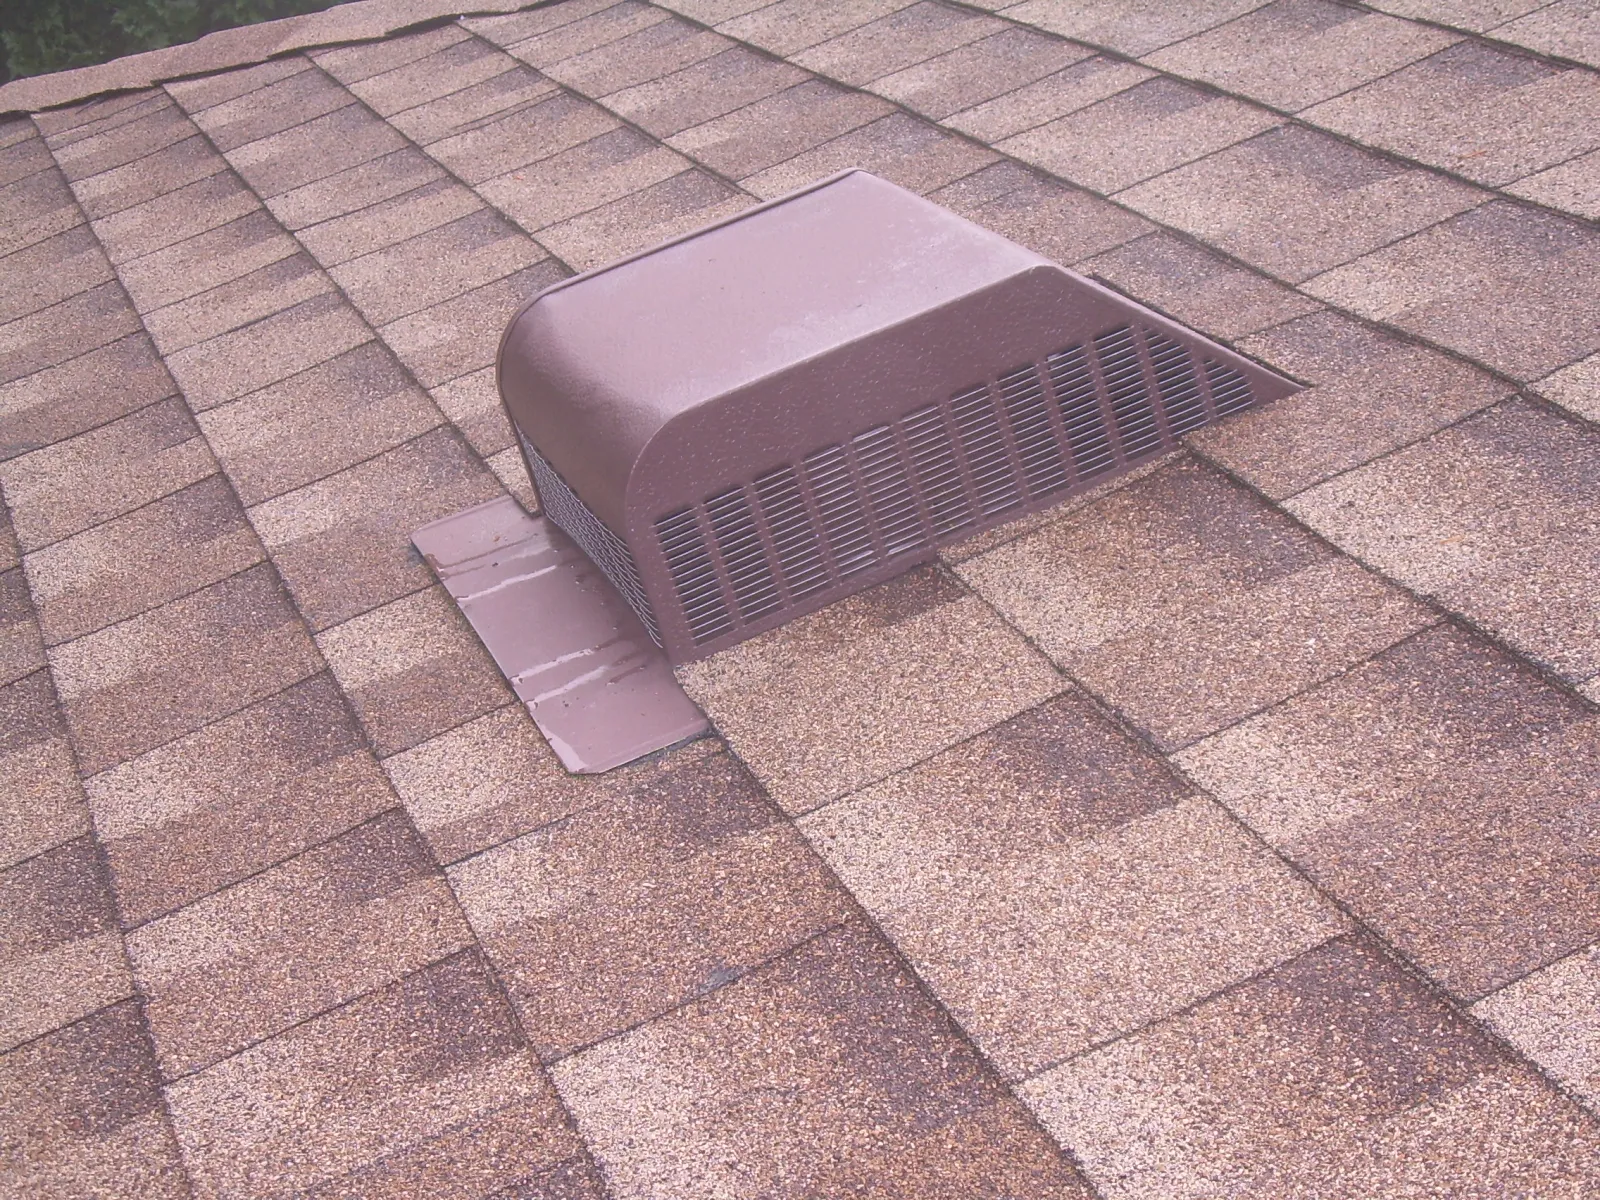 a square object on a brick surface